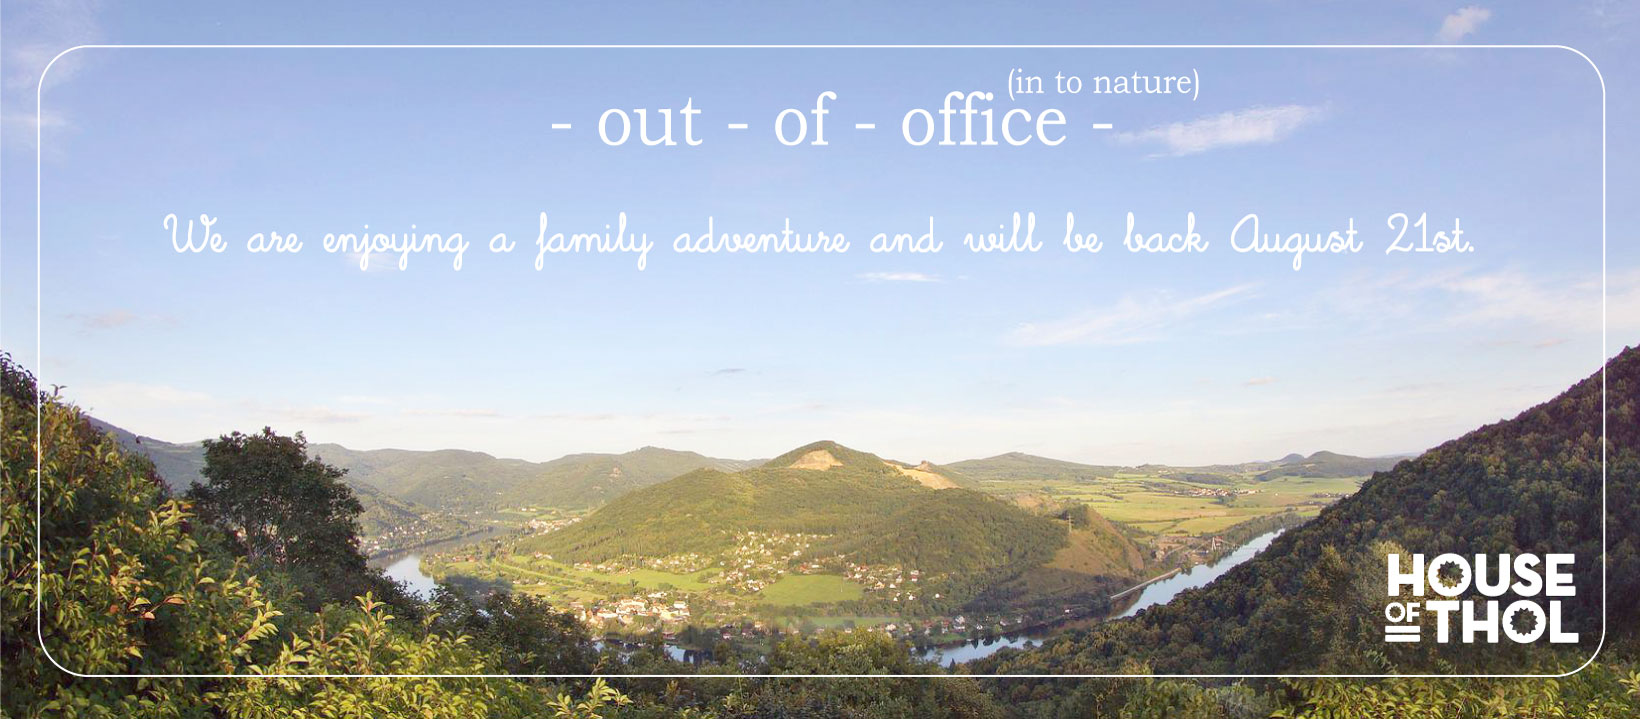 Out-of-office August 3-21